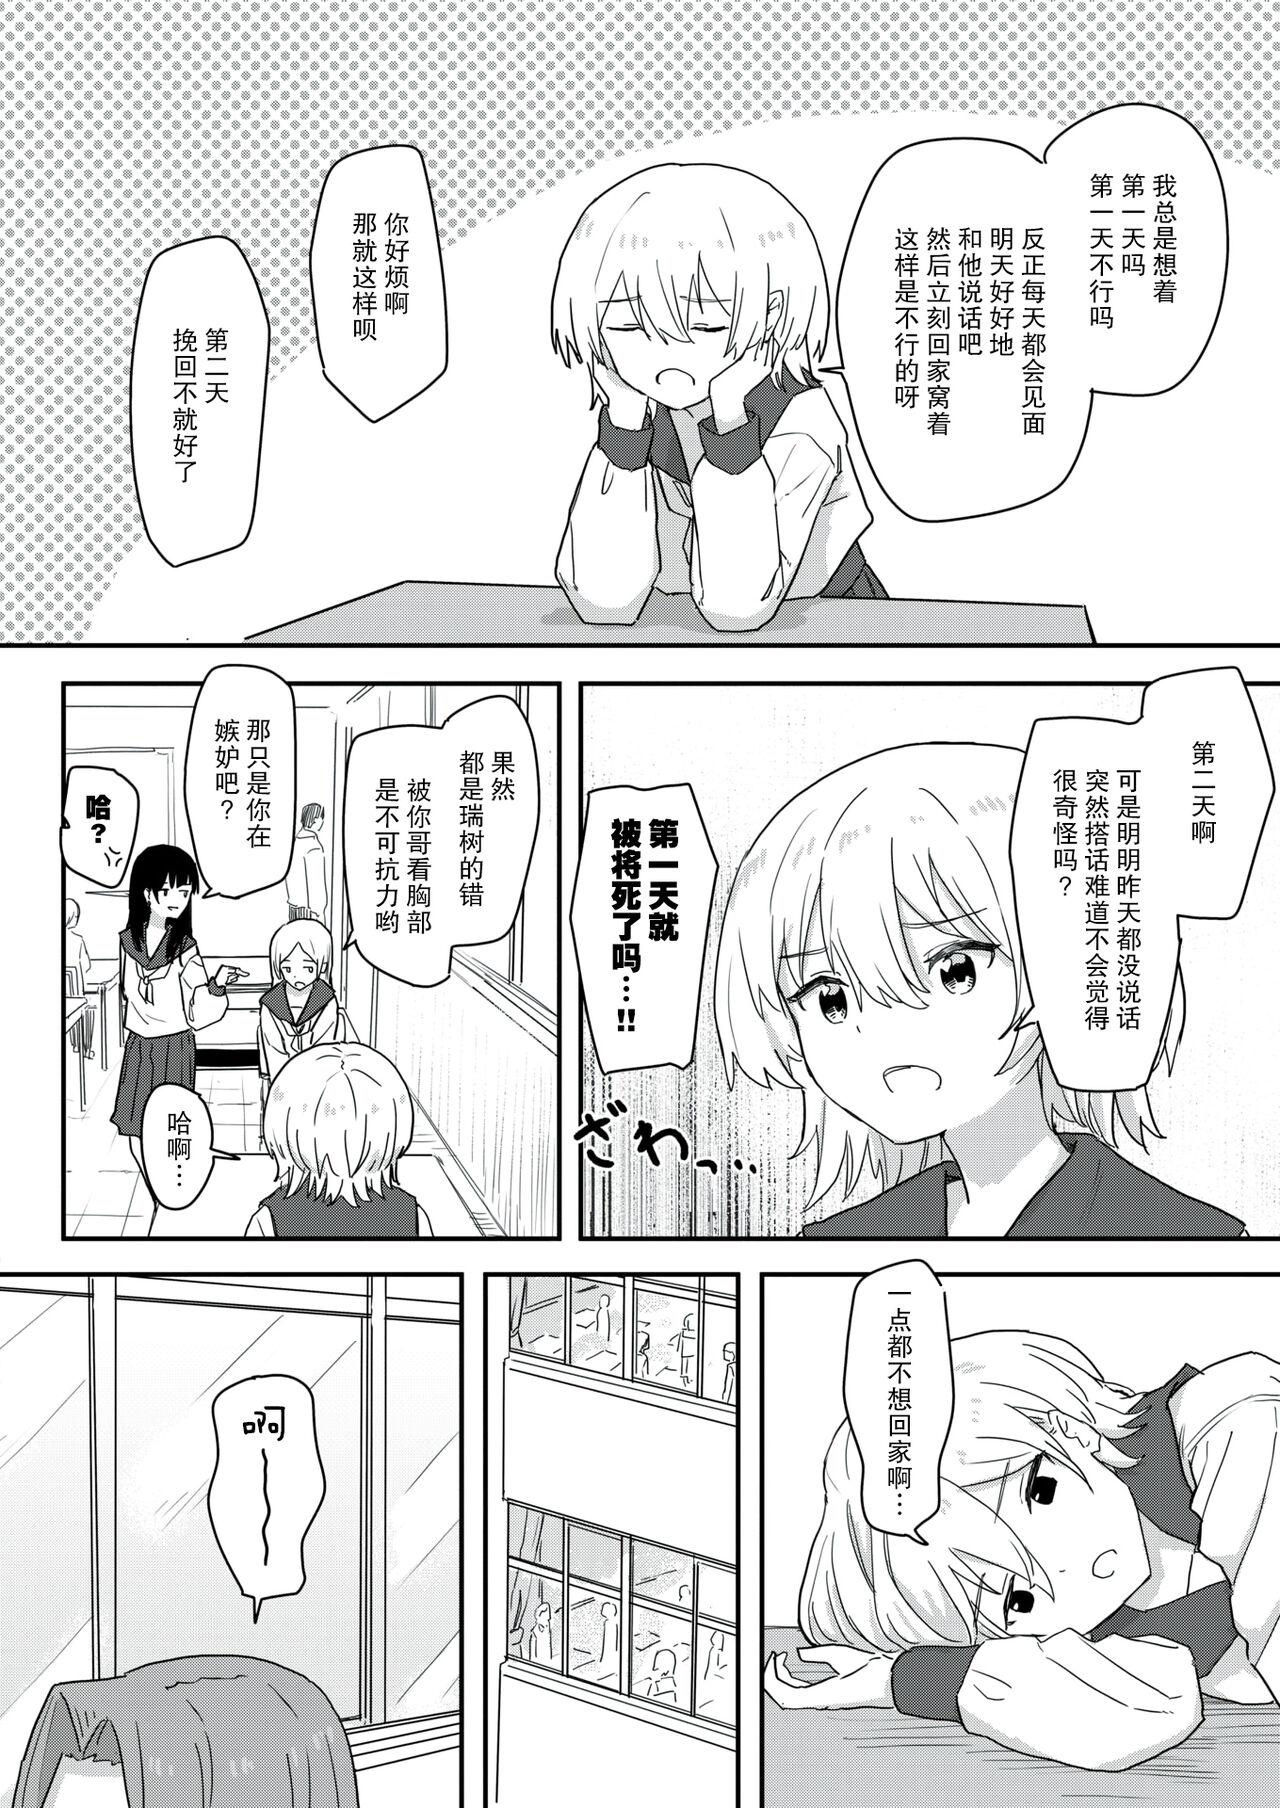 Daring 同居生活異常アリ 前編 Old Young - Page 5